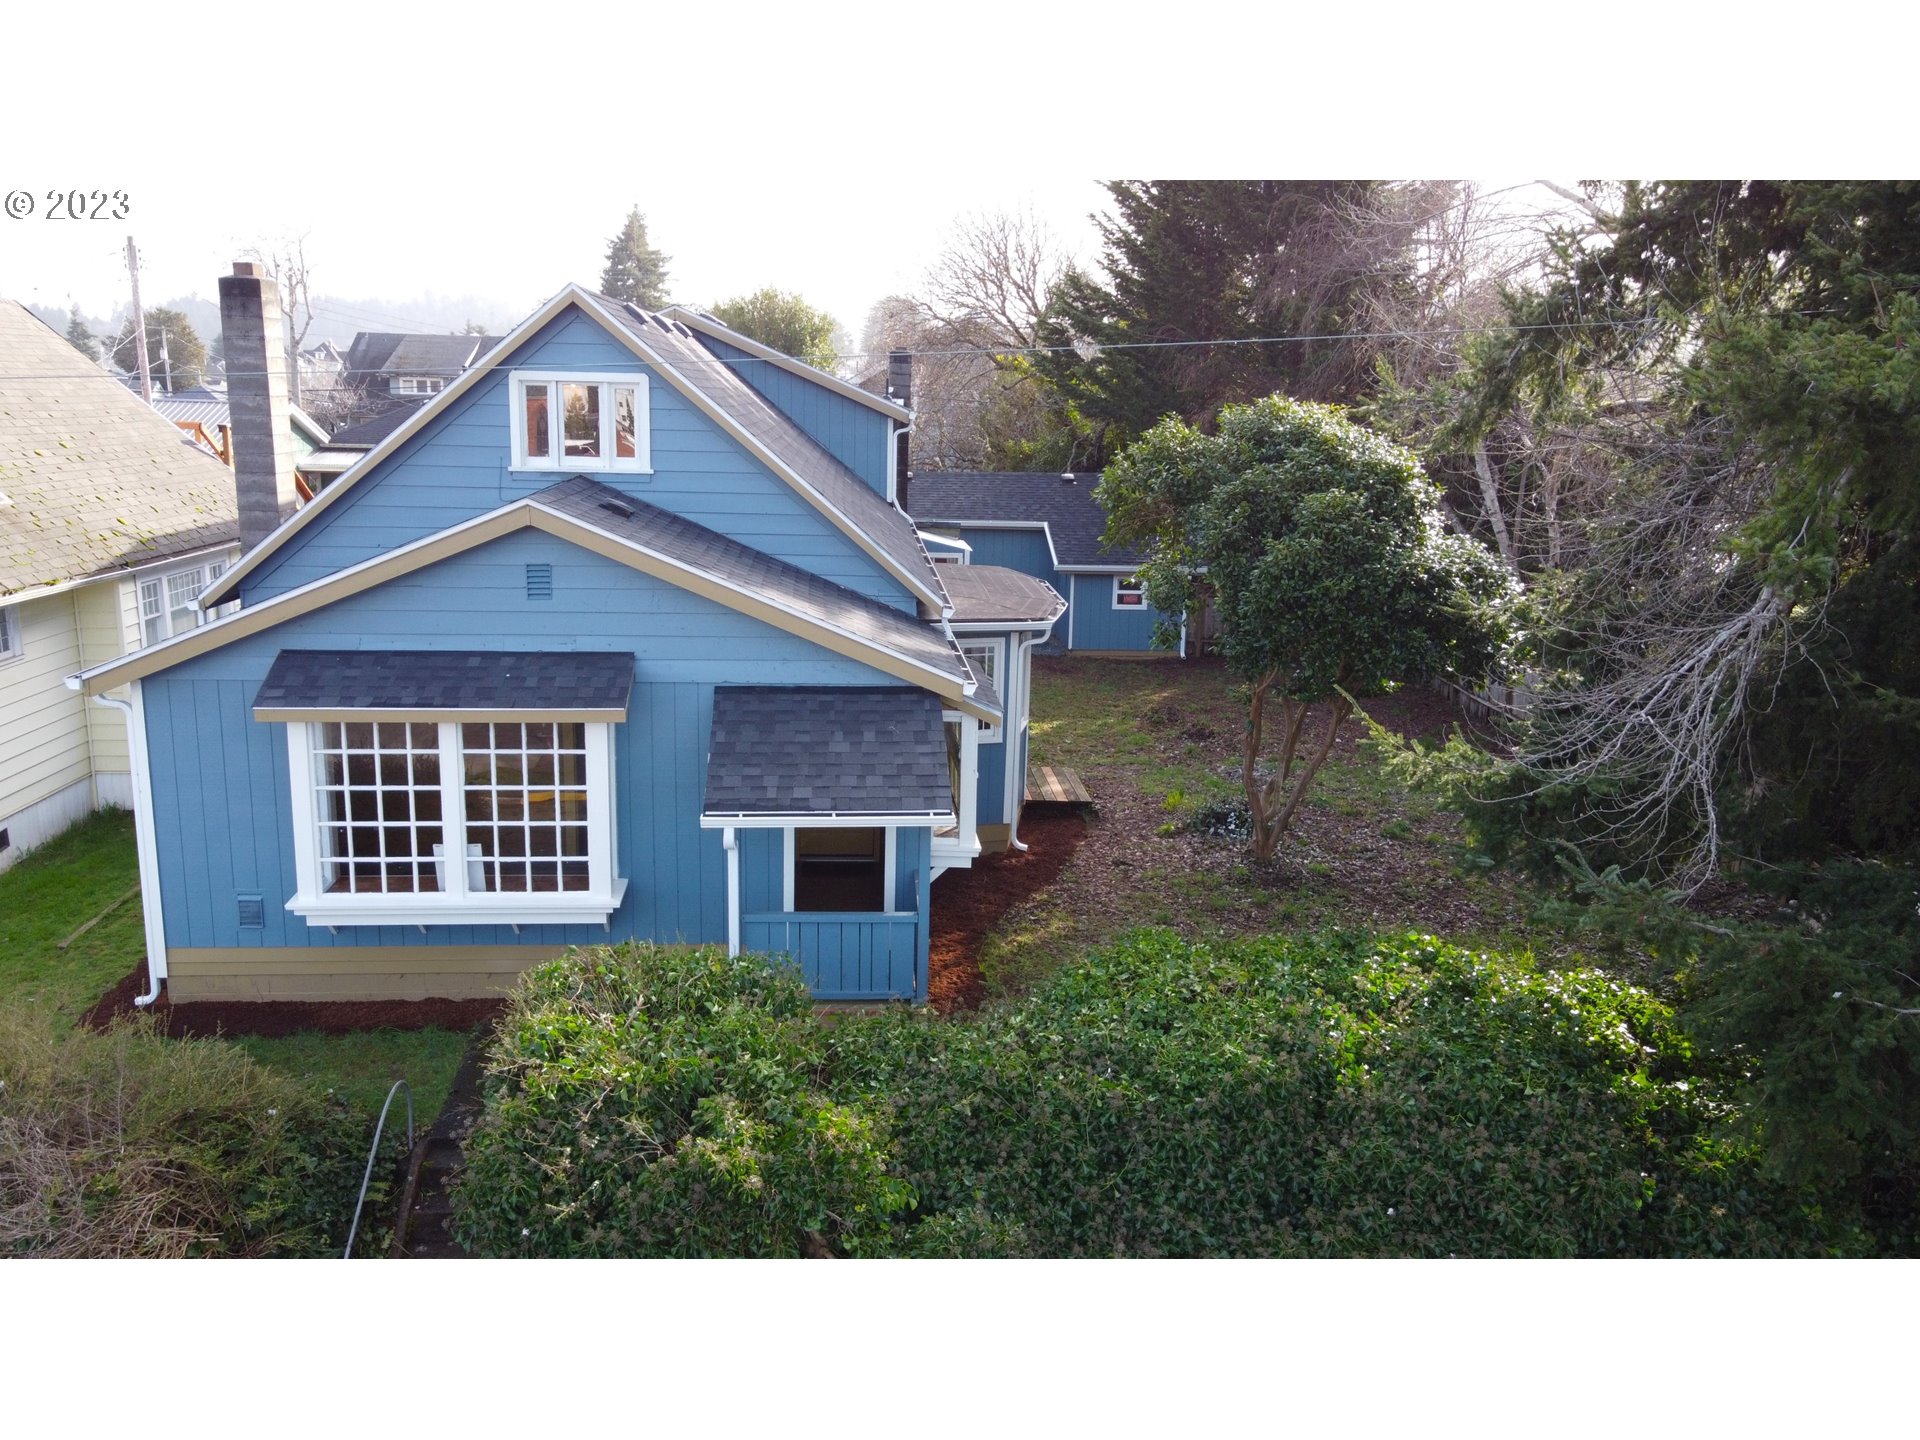 687 DONNELLY AVE, Coos Bay, OR 97420